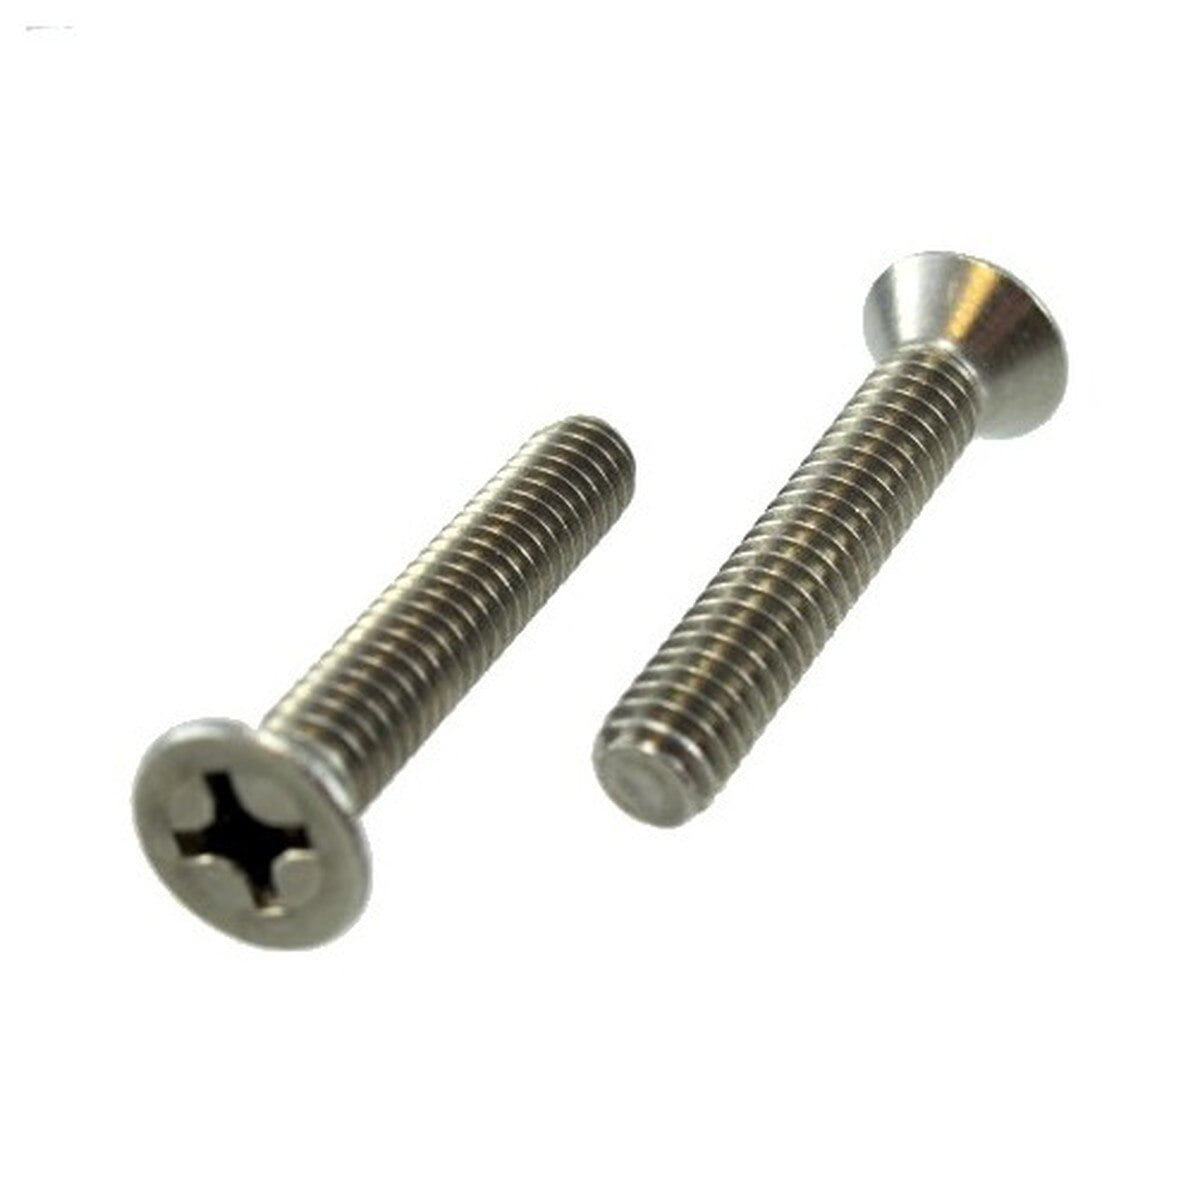 1/4-20x3/4 Powder Coated Flat Black Stainless Steel Button Head Bolts Qty 12